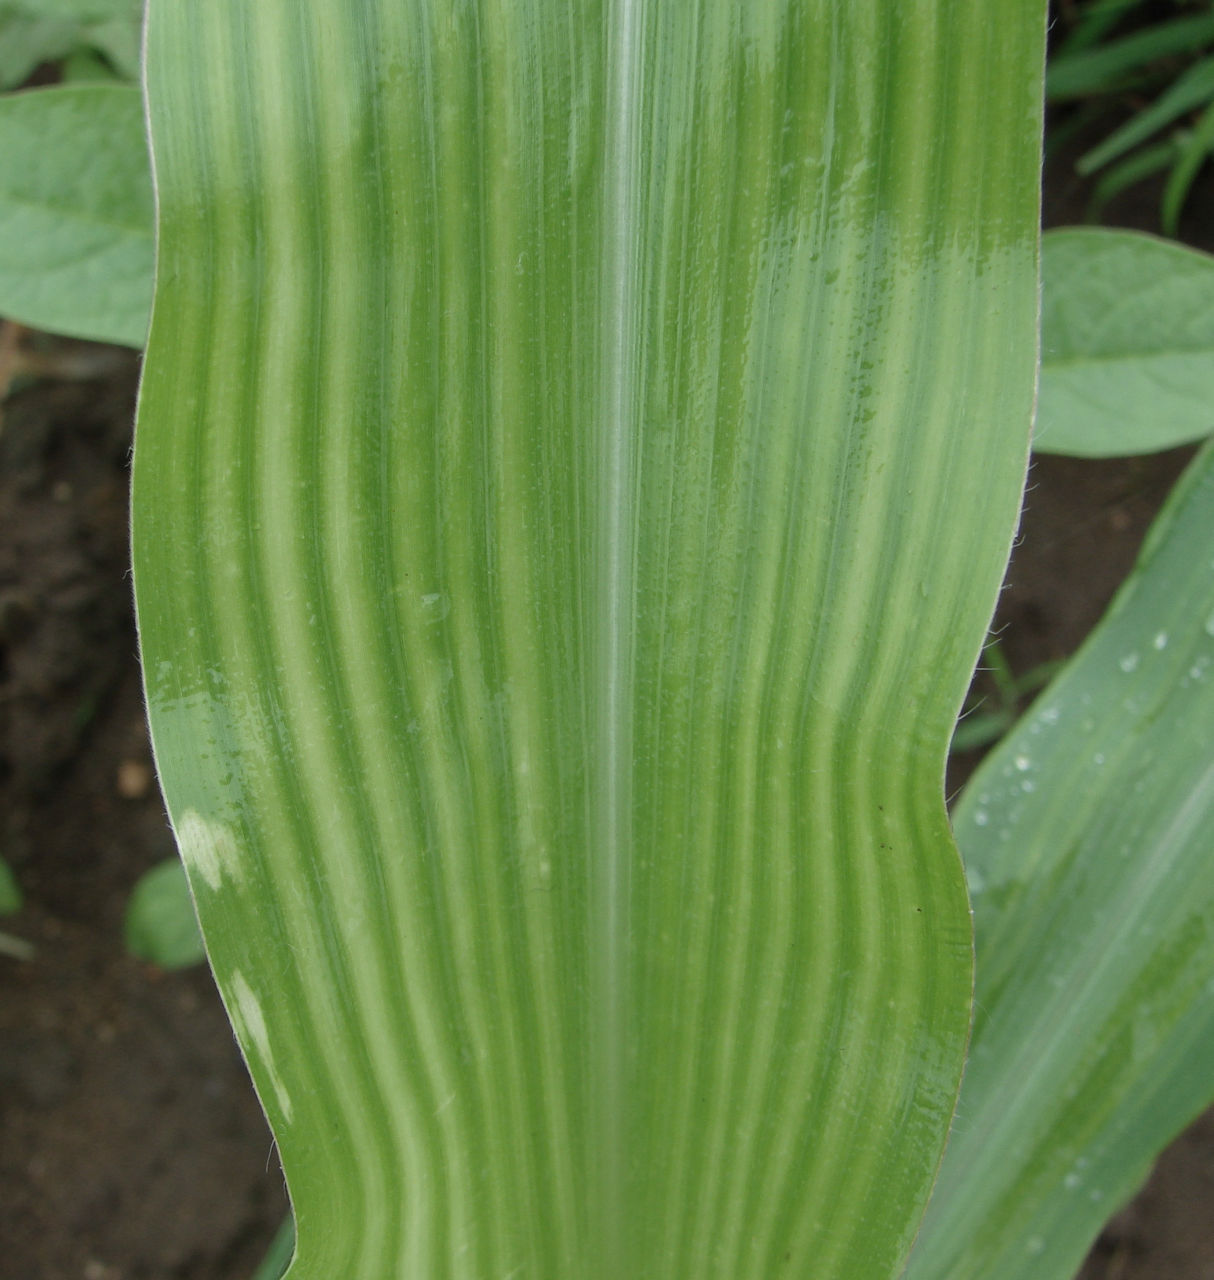 Figure 9. Manganese (Mn) Deficiency in Corn. Photo is provided courtesy of the International Plant Nutrition Institute (IPNI) and its IPNI Crop Nutrient Deficiency Image Collection, M, K. Sharma and P. Kumar 